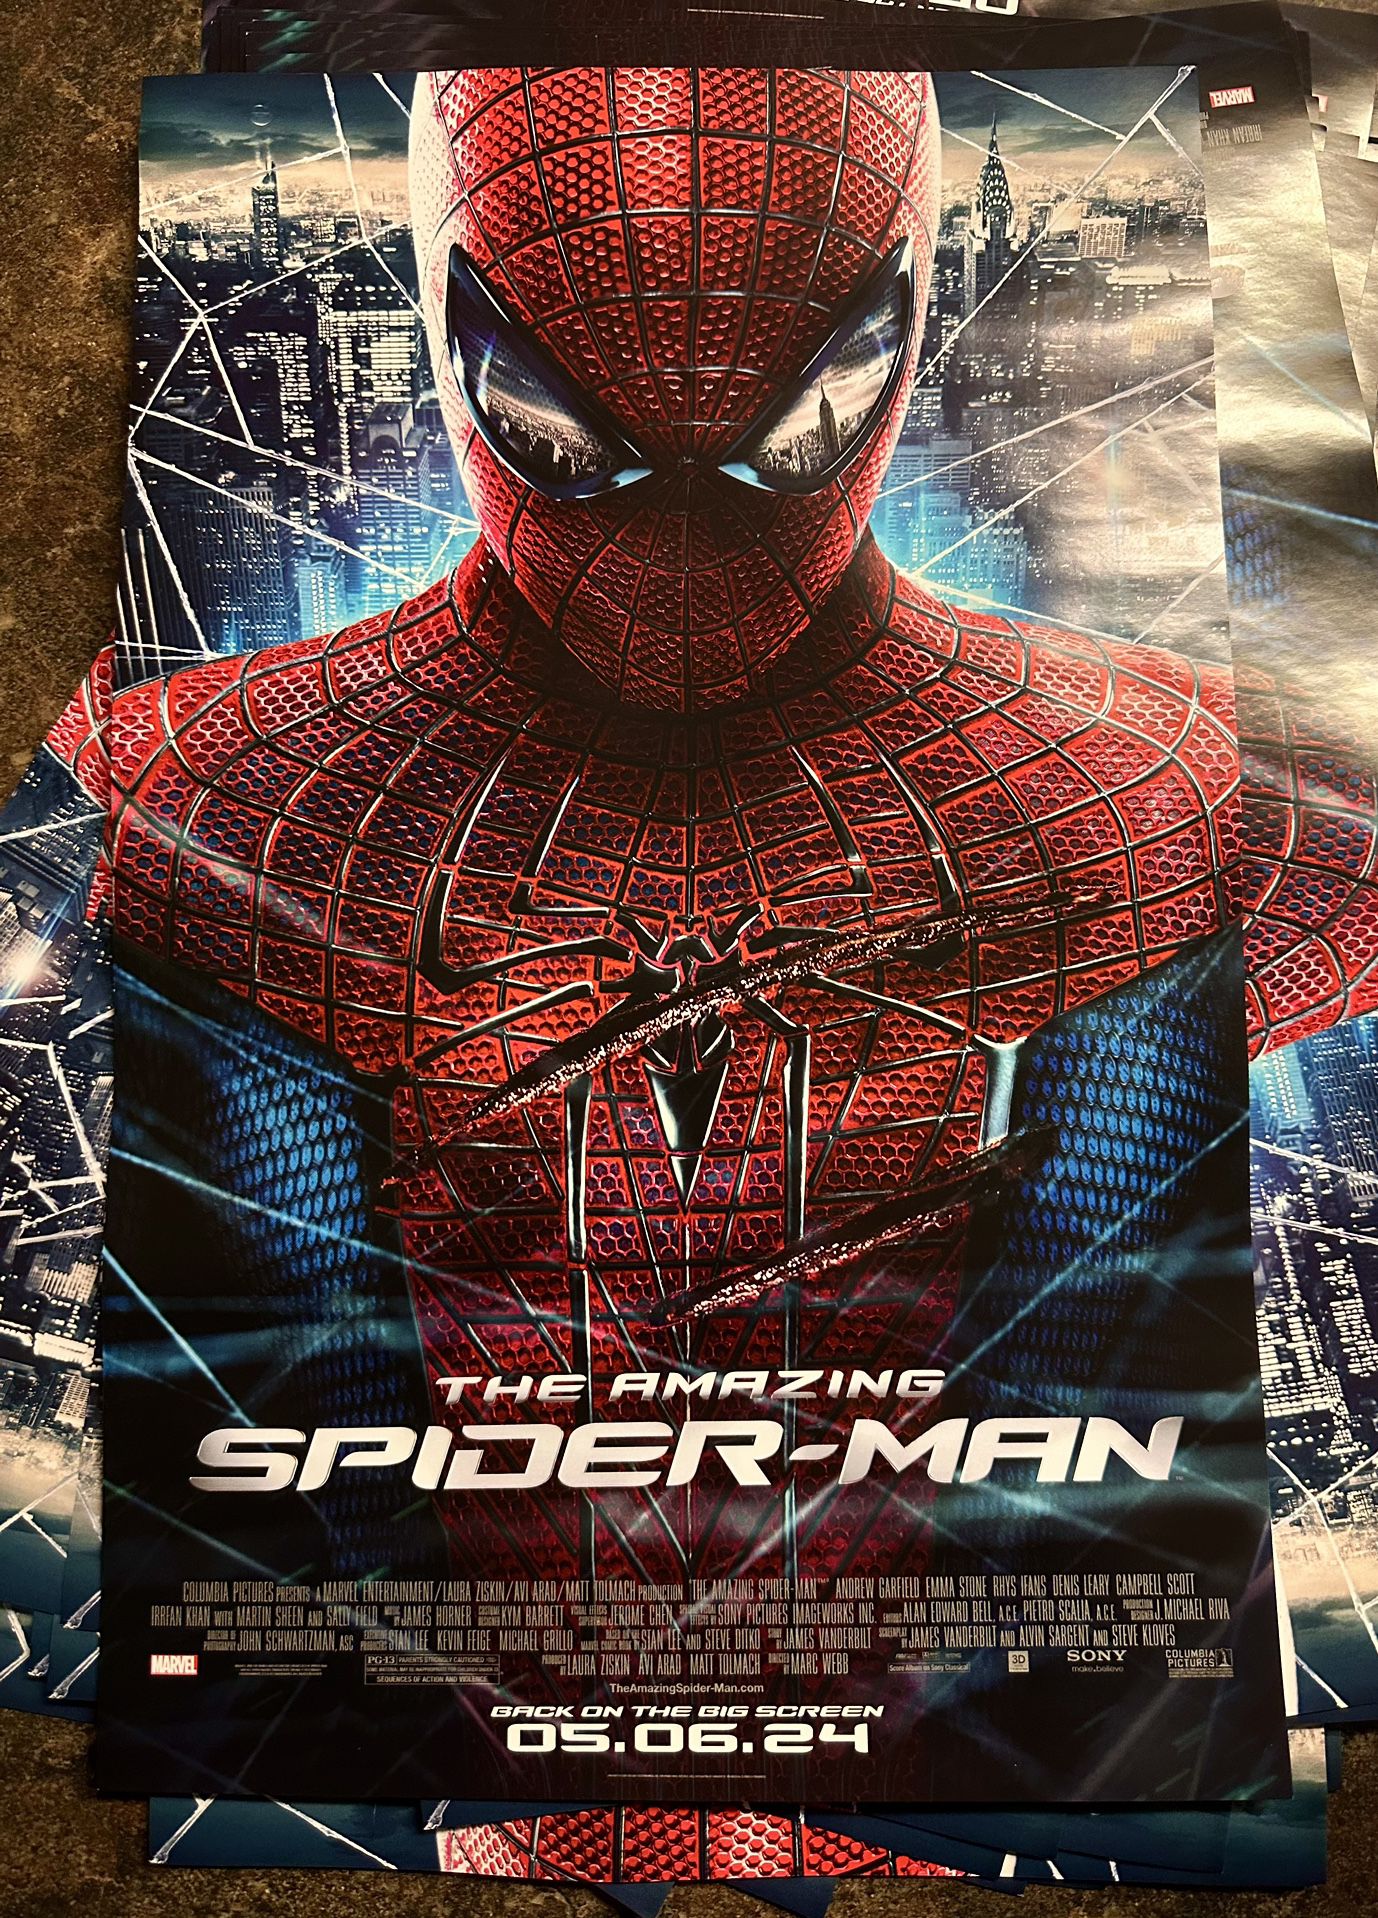 The Amazing Spider-Man (2012) Movie Poster [Originals From AMC Theater]